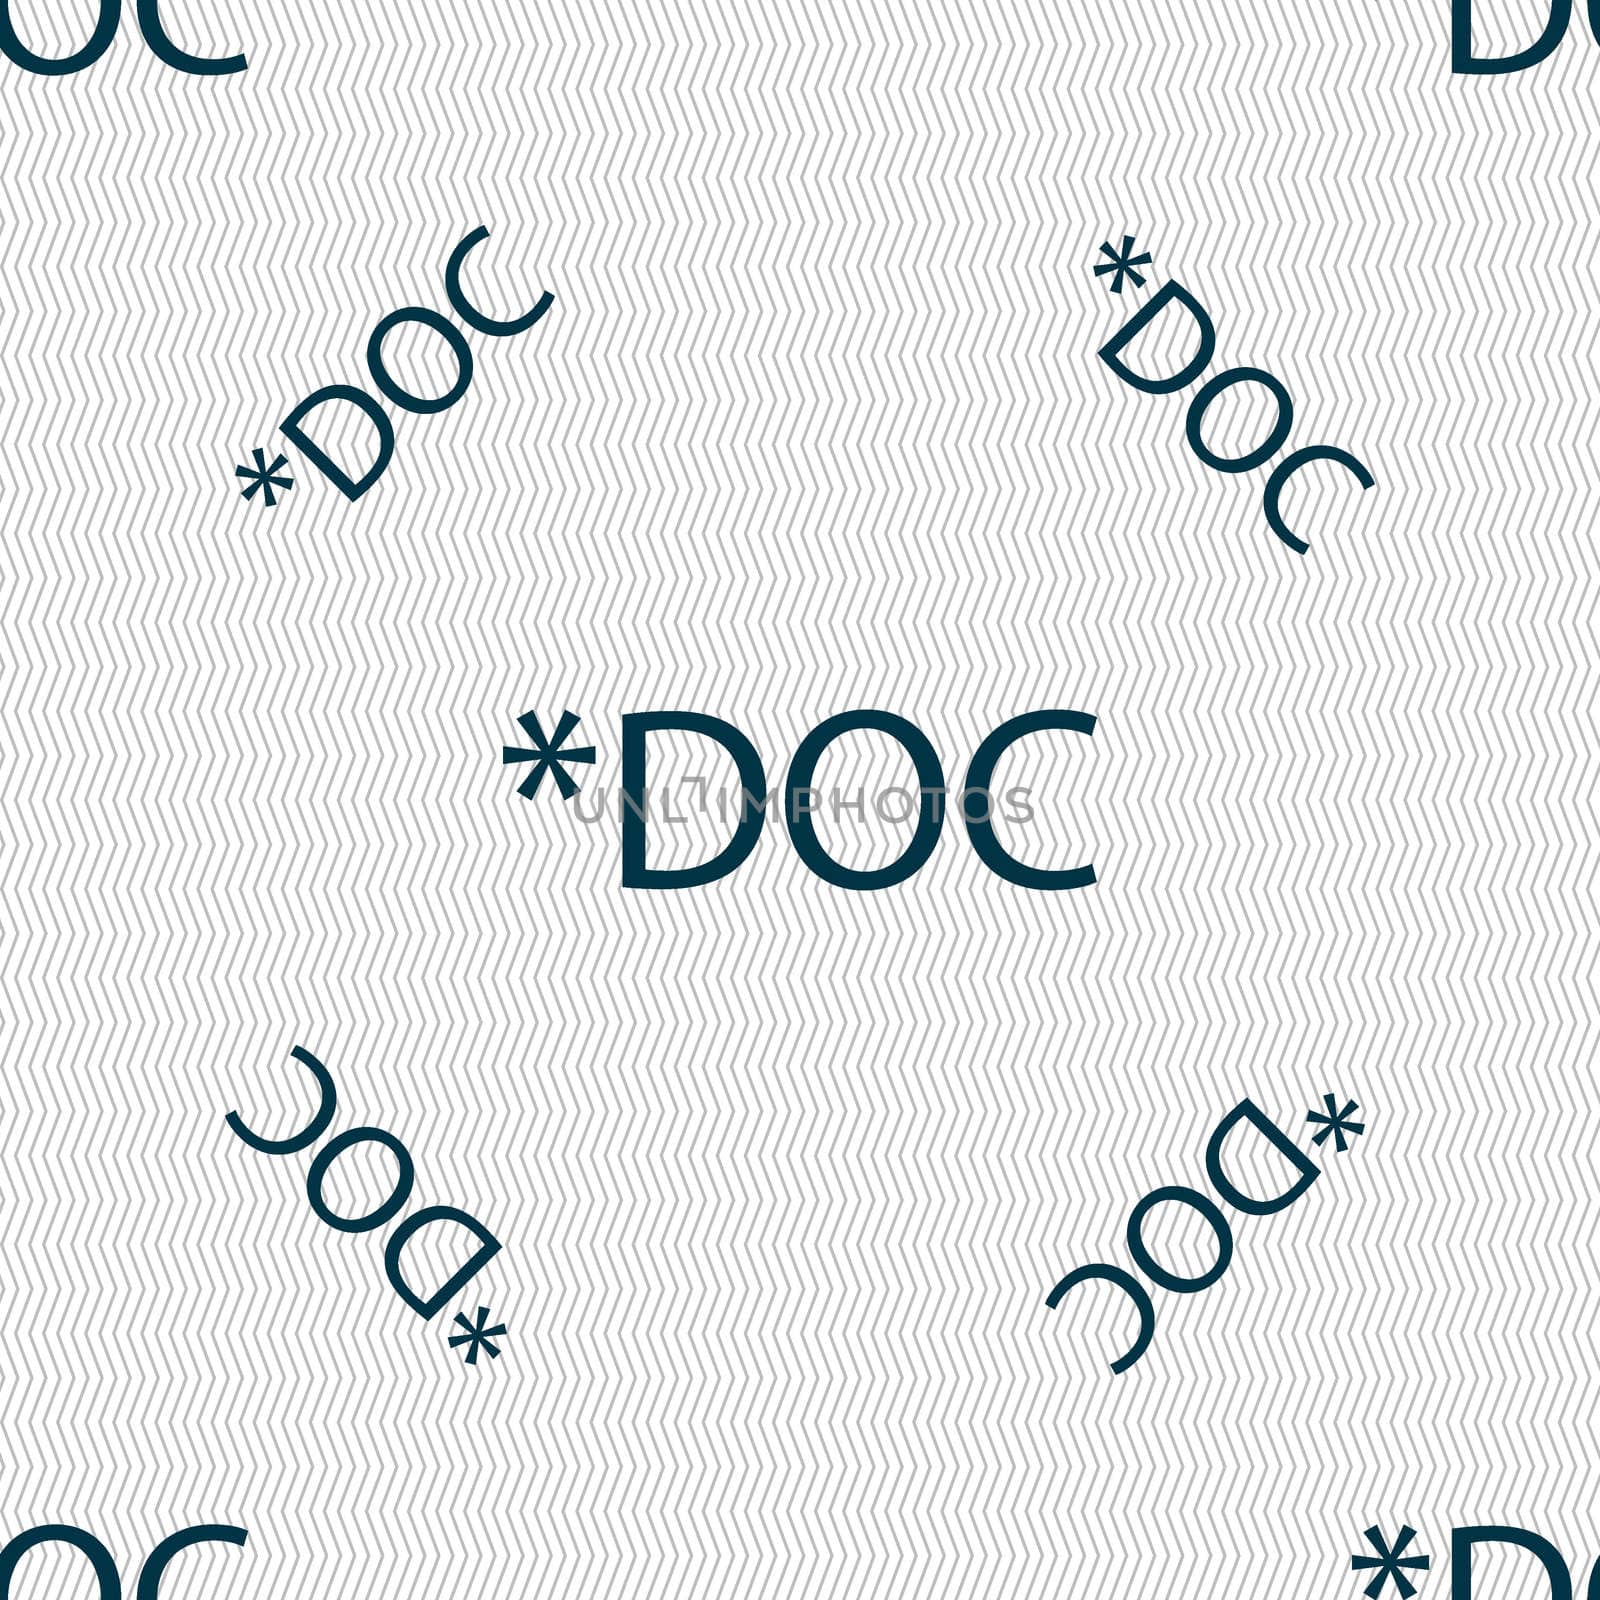 File document icon. Download doc button. Doc file extension symbol. Seamless pattern with geometric texture. illustration